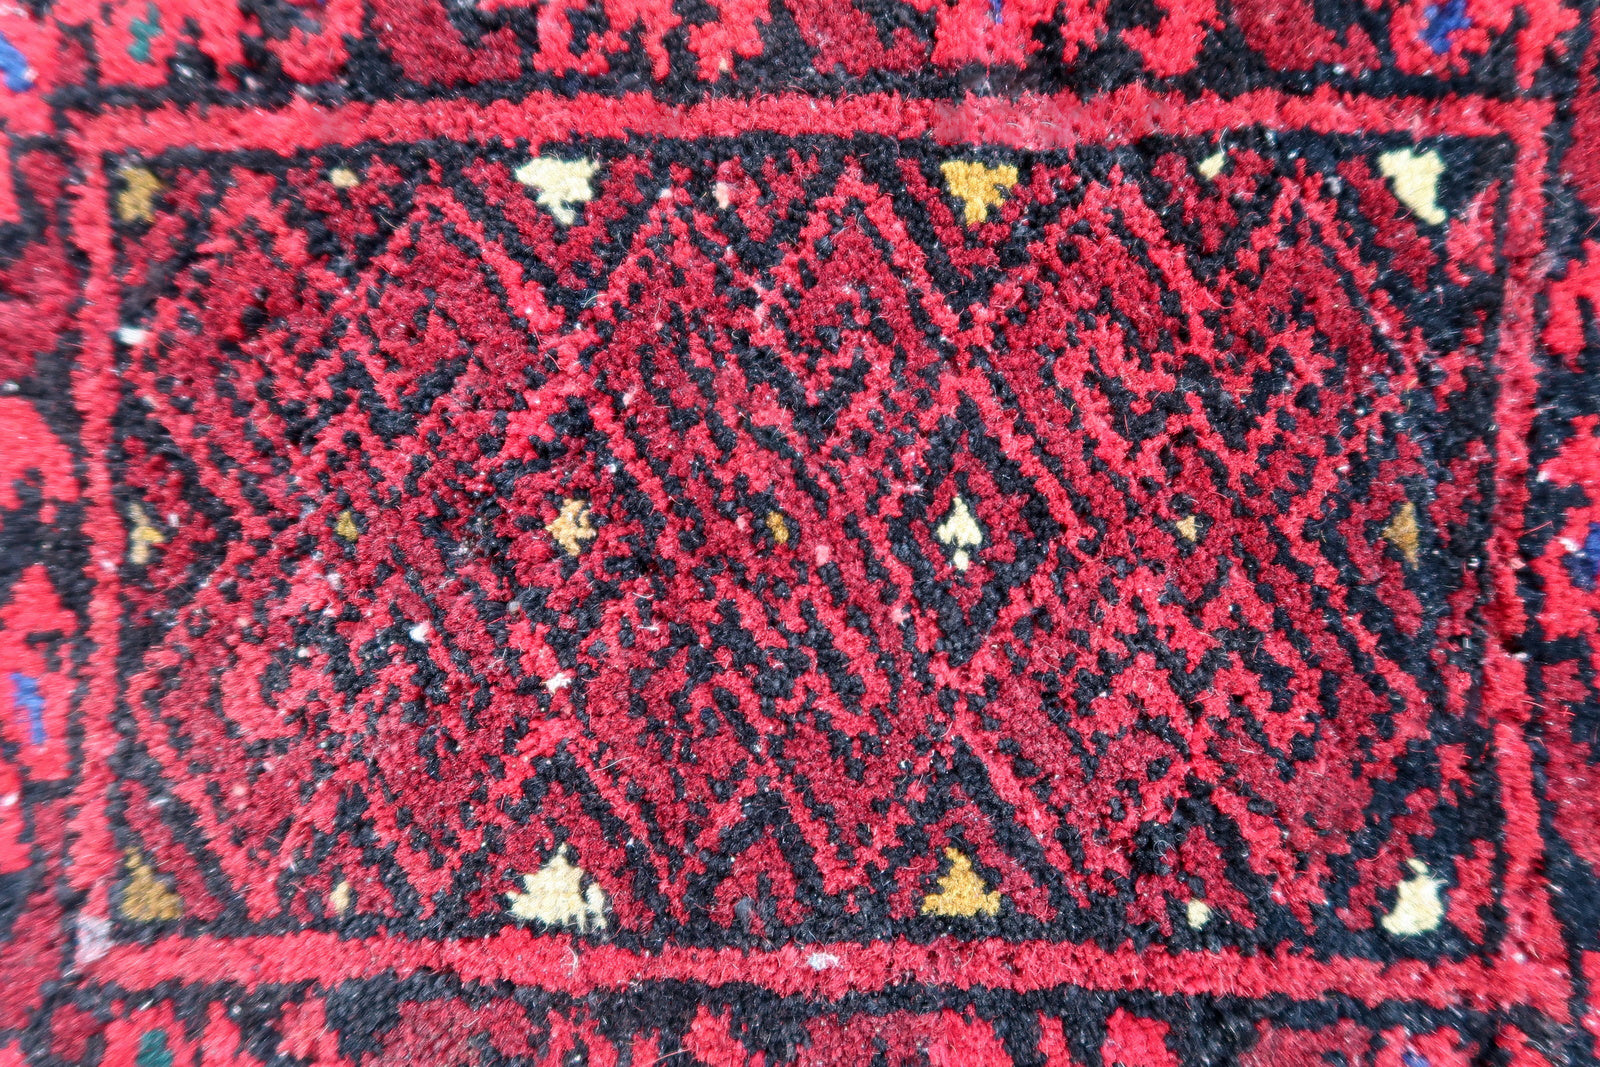 Handmade vintage Afghan Ersari mat in bright red shade. The rug is from the end of 20th century in original good condition. It can be used as a doll house rug.